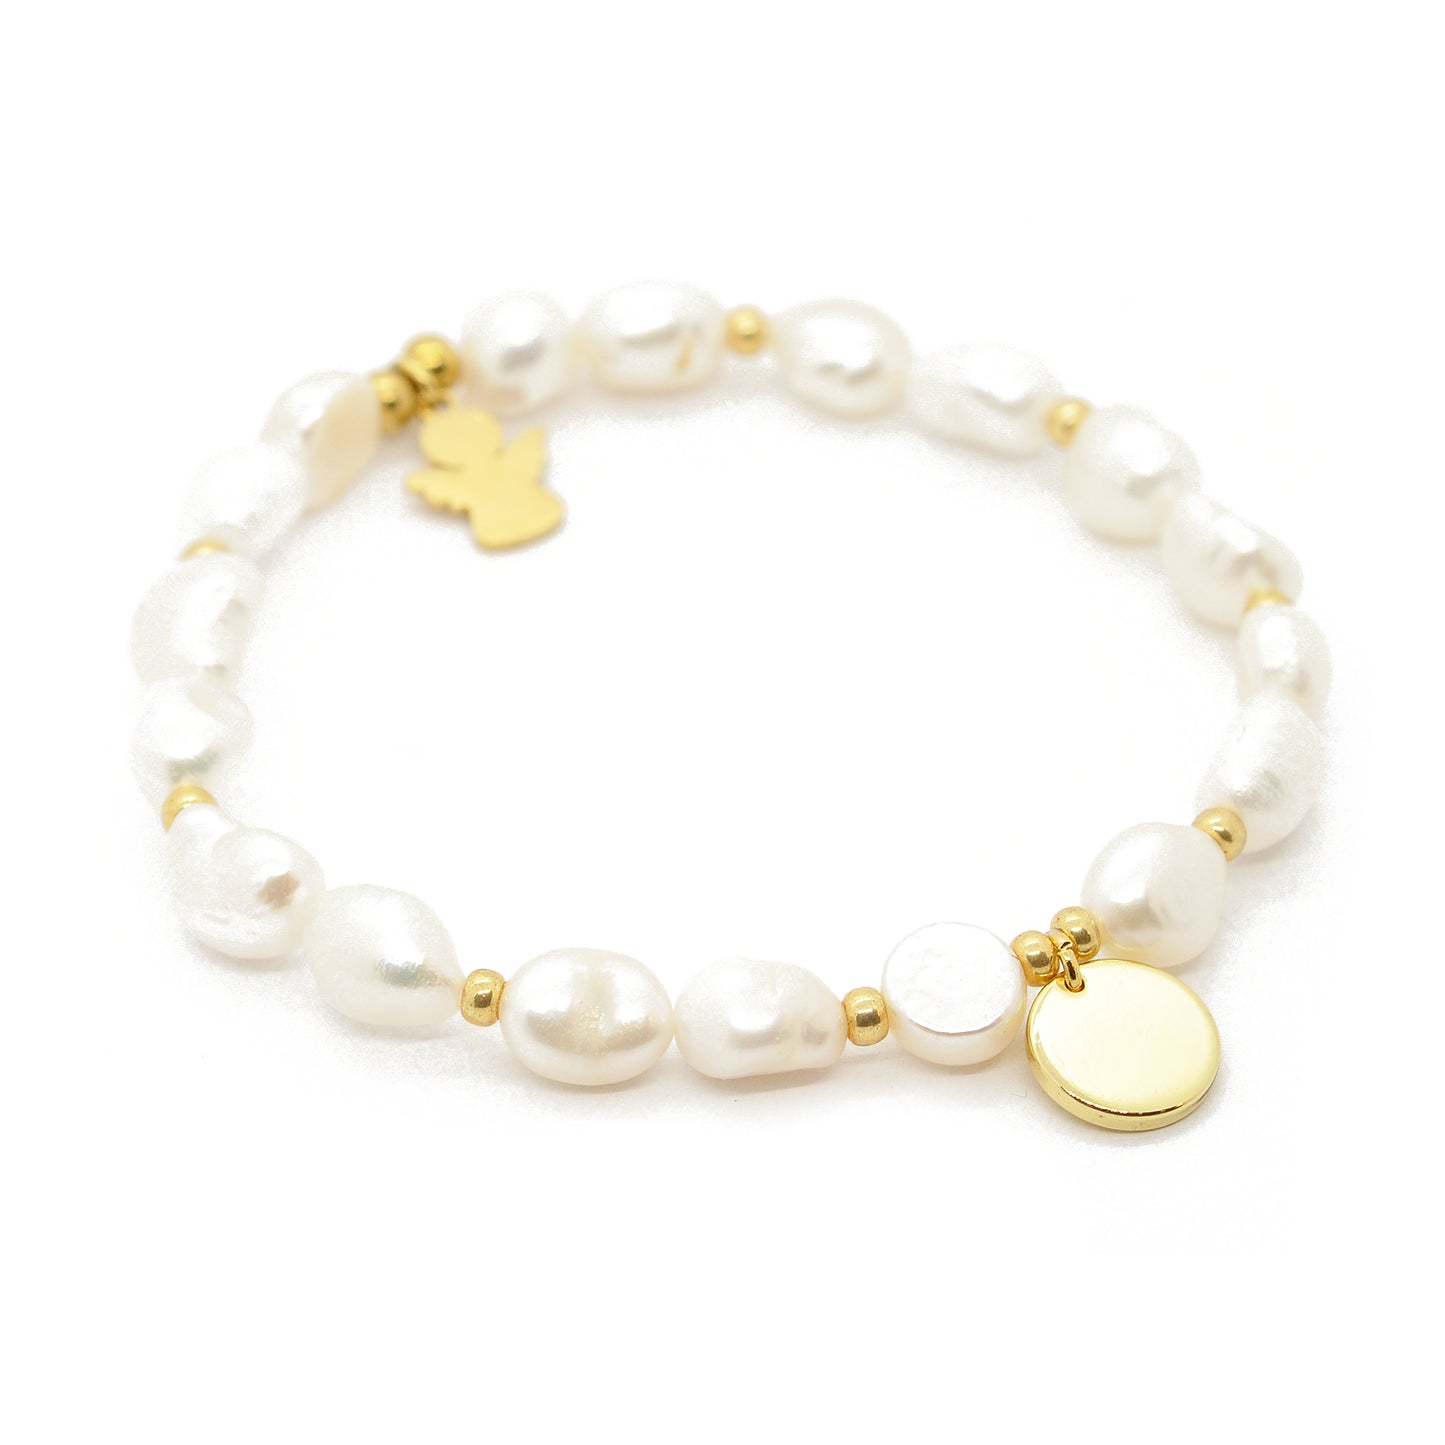 Mama bracelet with guardian angel made of freshwater pearls / stainless steel gold-plated